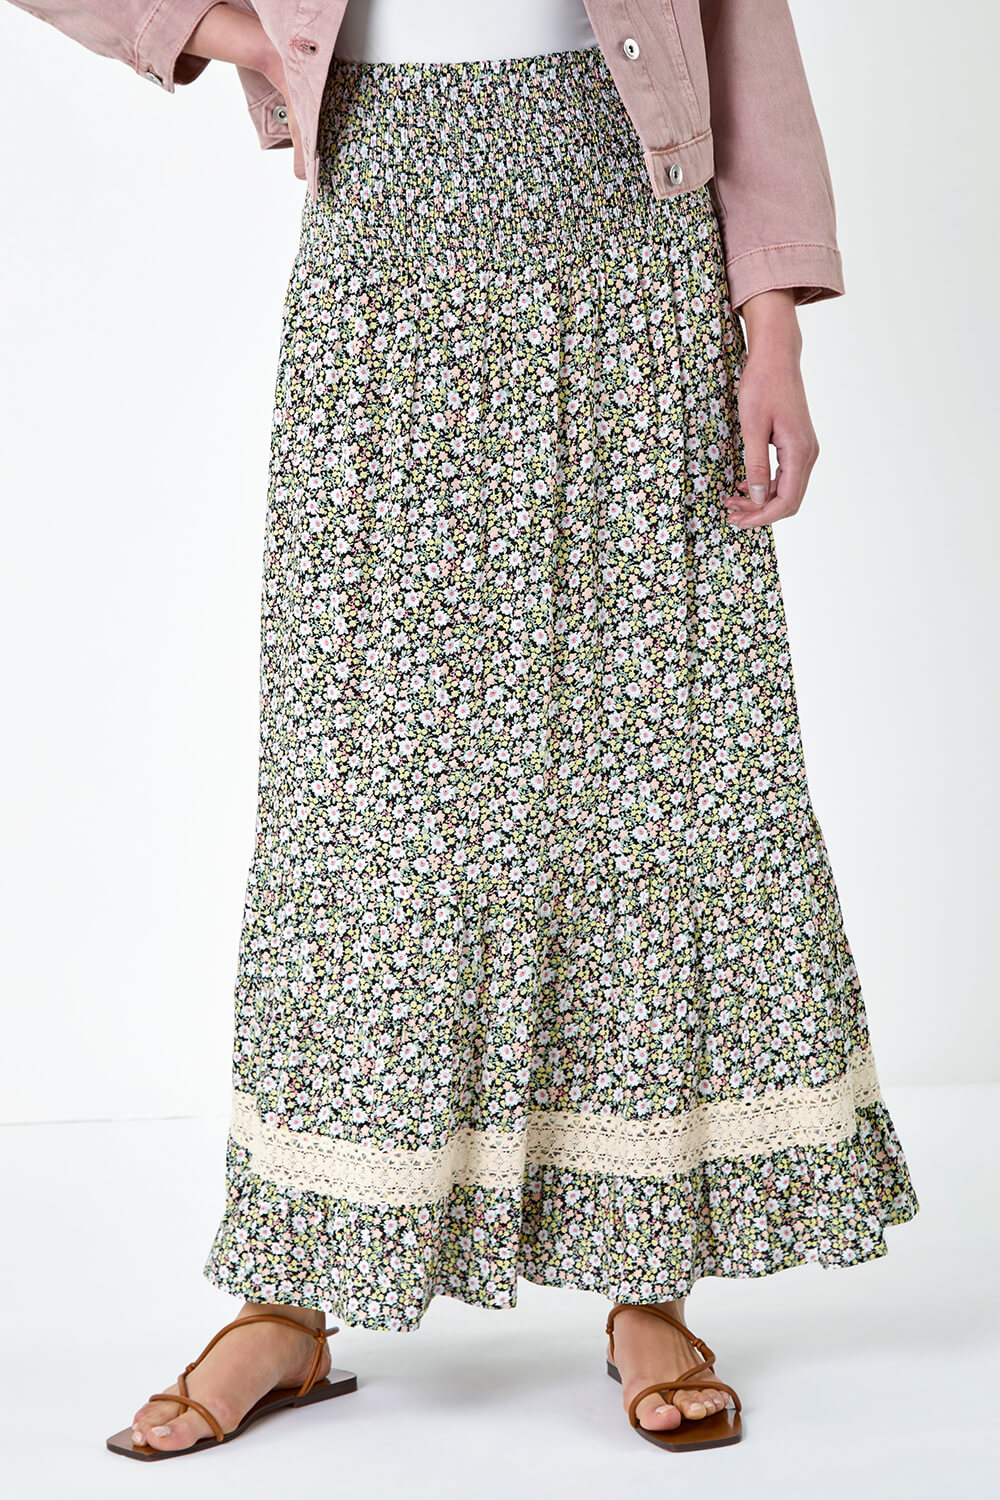 Multi  Lace Trim Floral Multiway Skirt Dress, Image 4 of 6